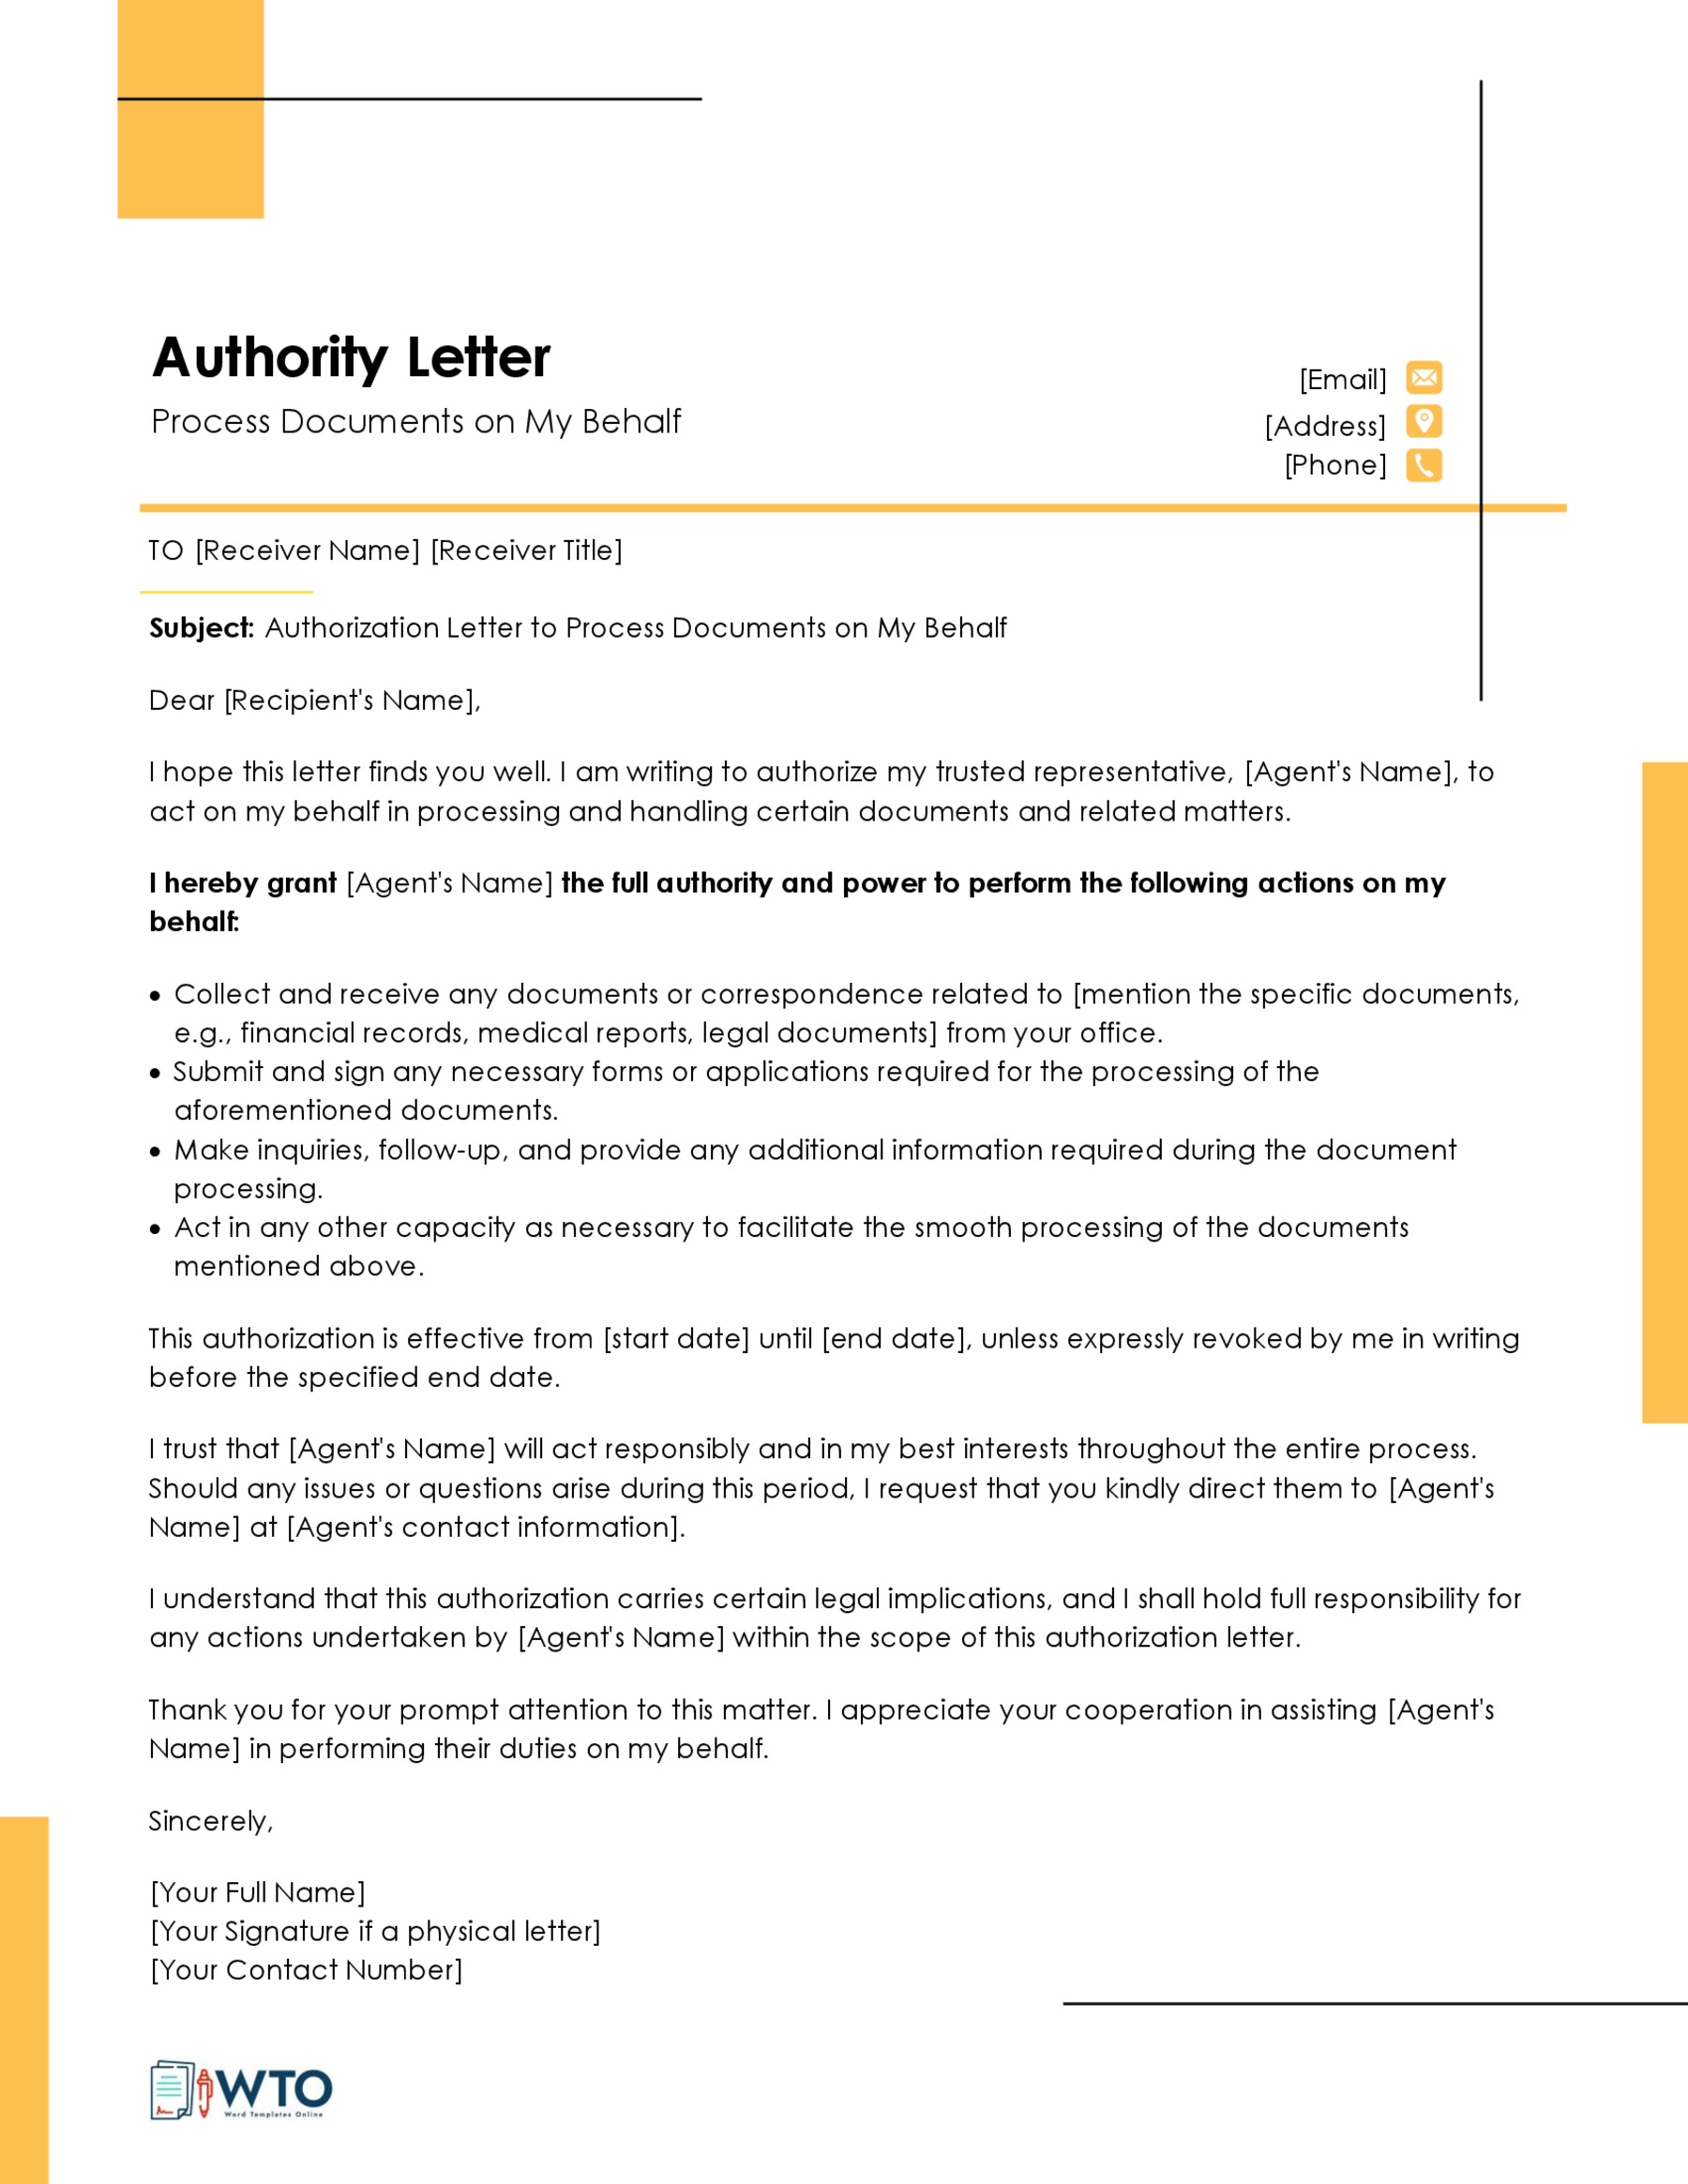 Authorization Letter Format Word free download